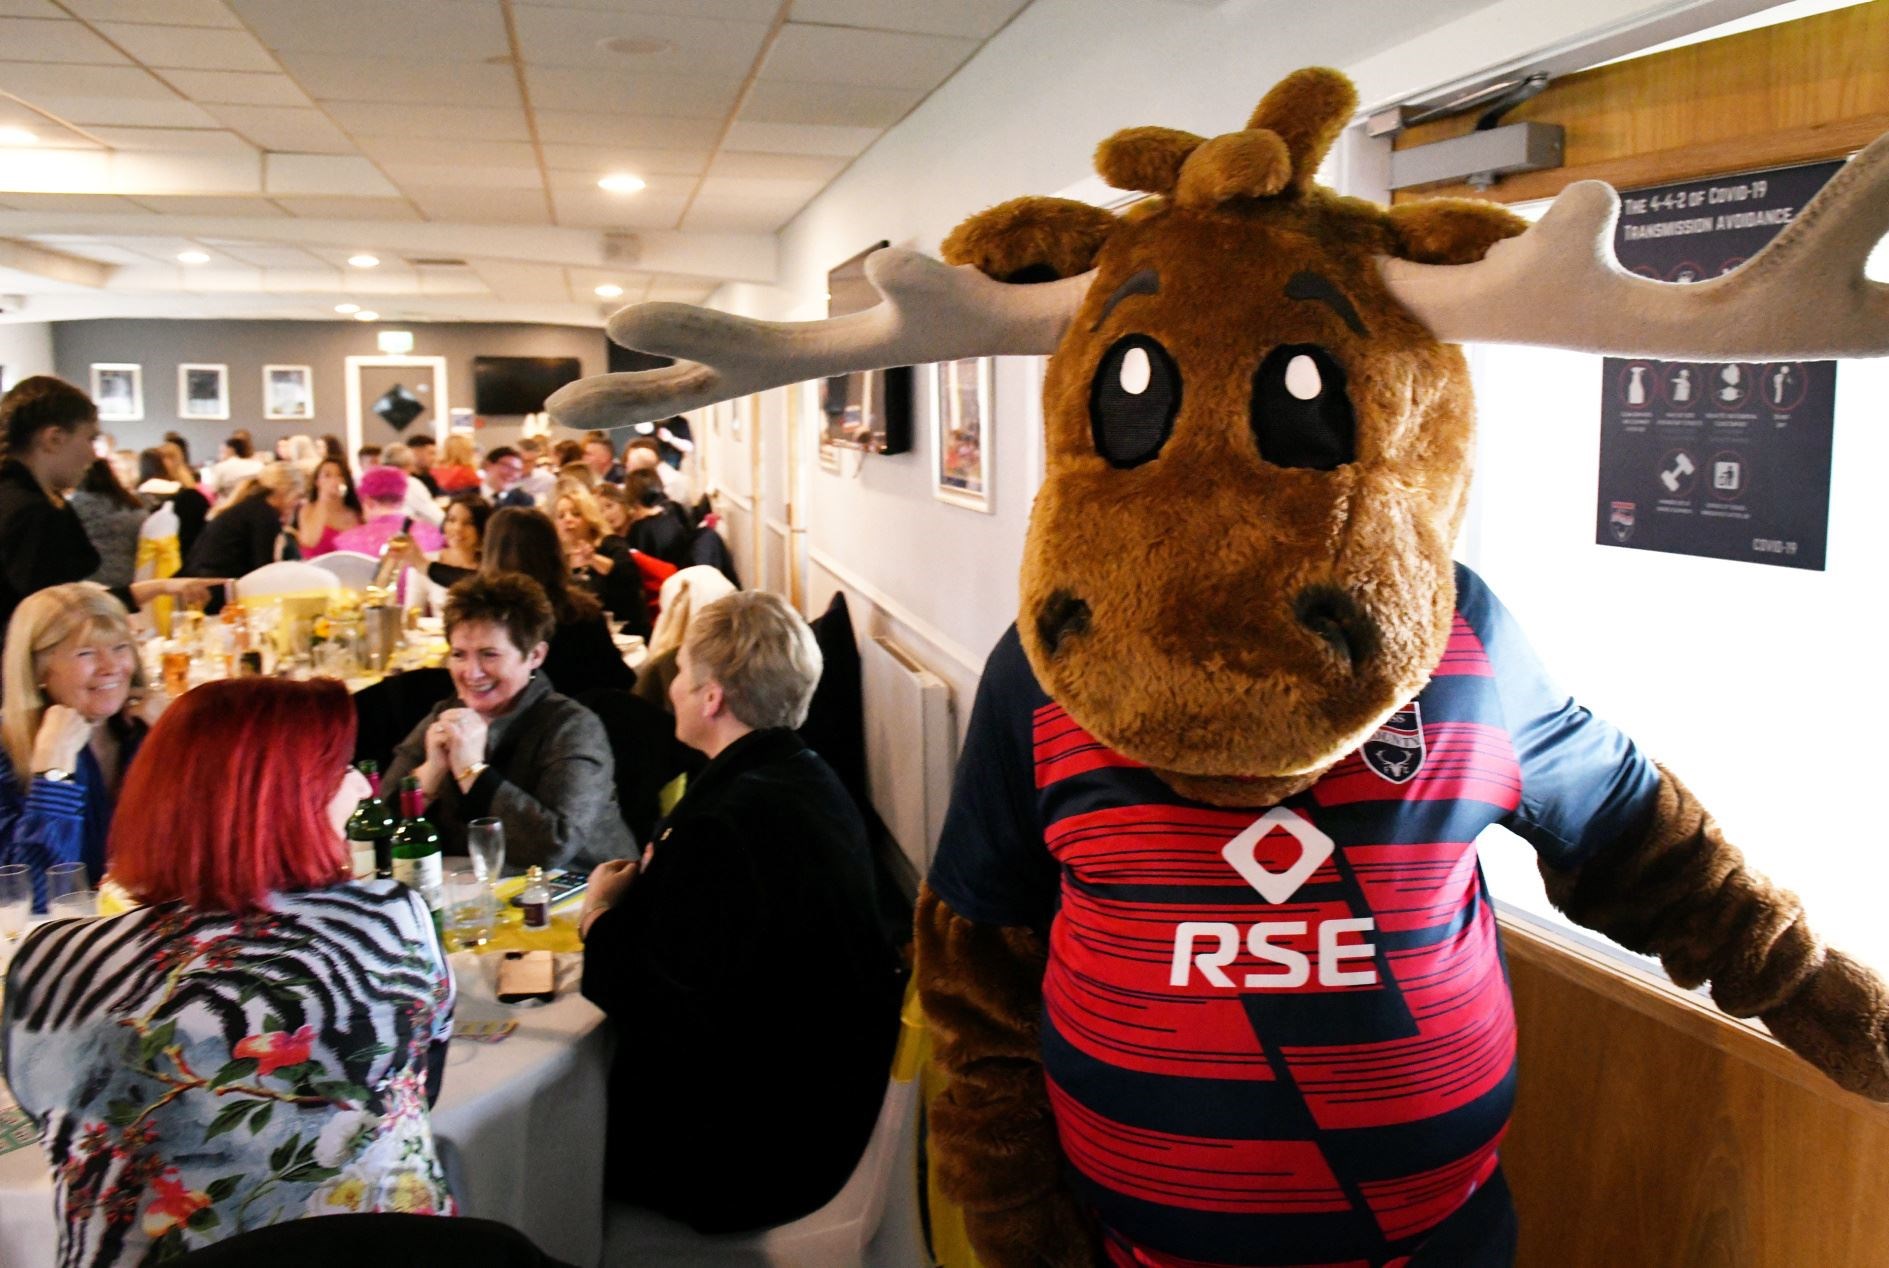 The Staggies' mascot enters the party. Picture: James Mackenzie.